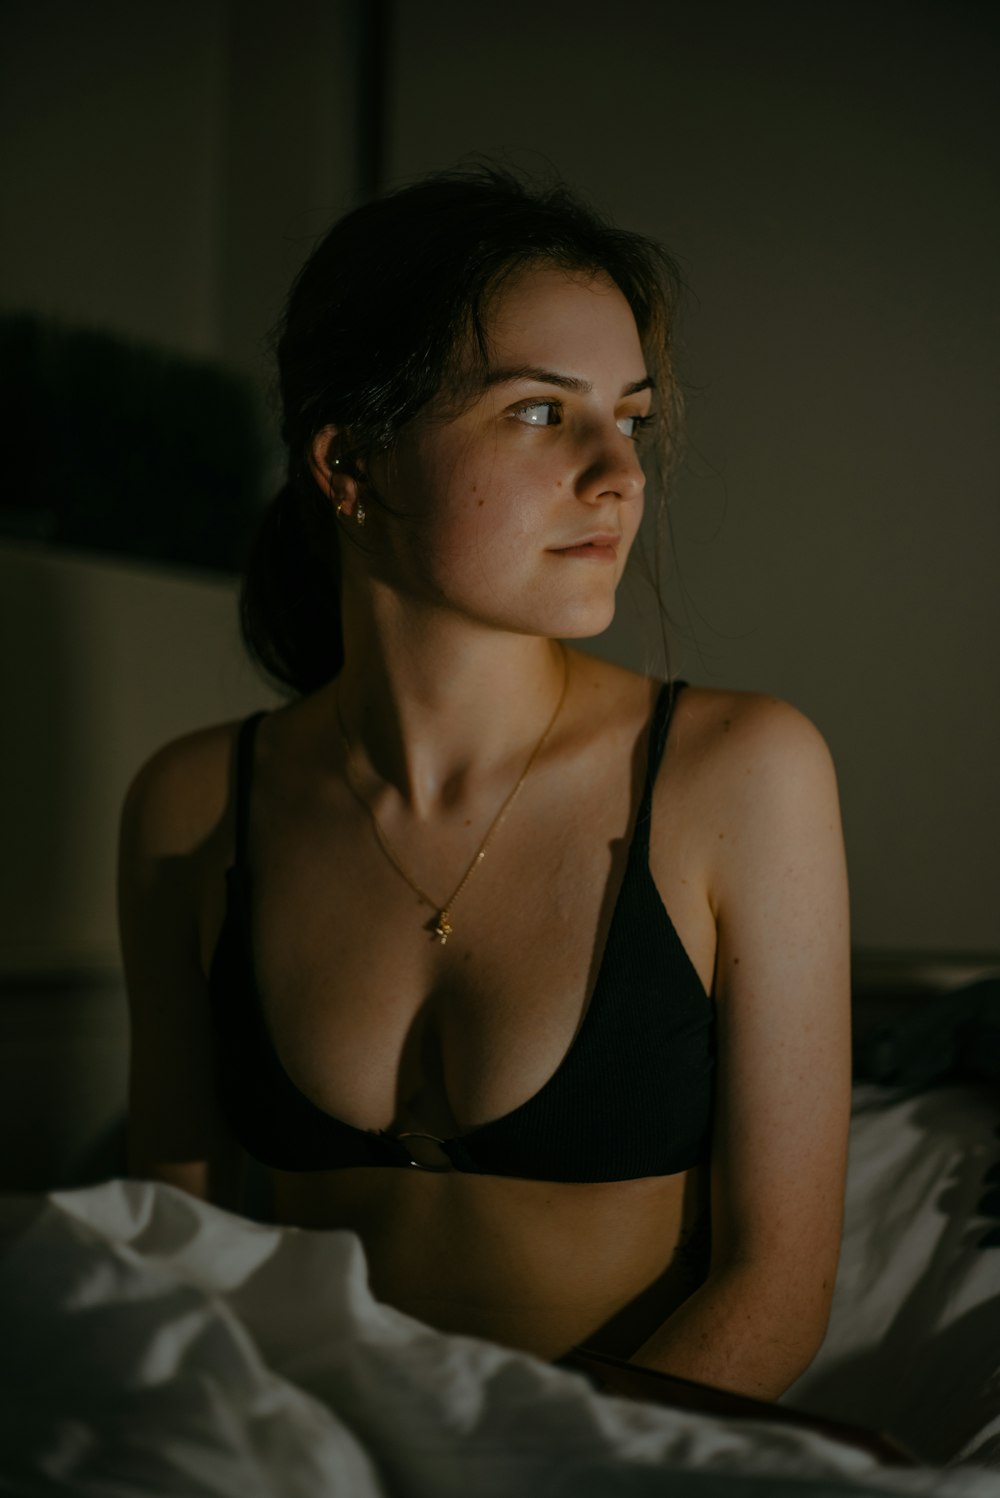 A woman in a bra top sitting on a bed photo – Free Female Image on